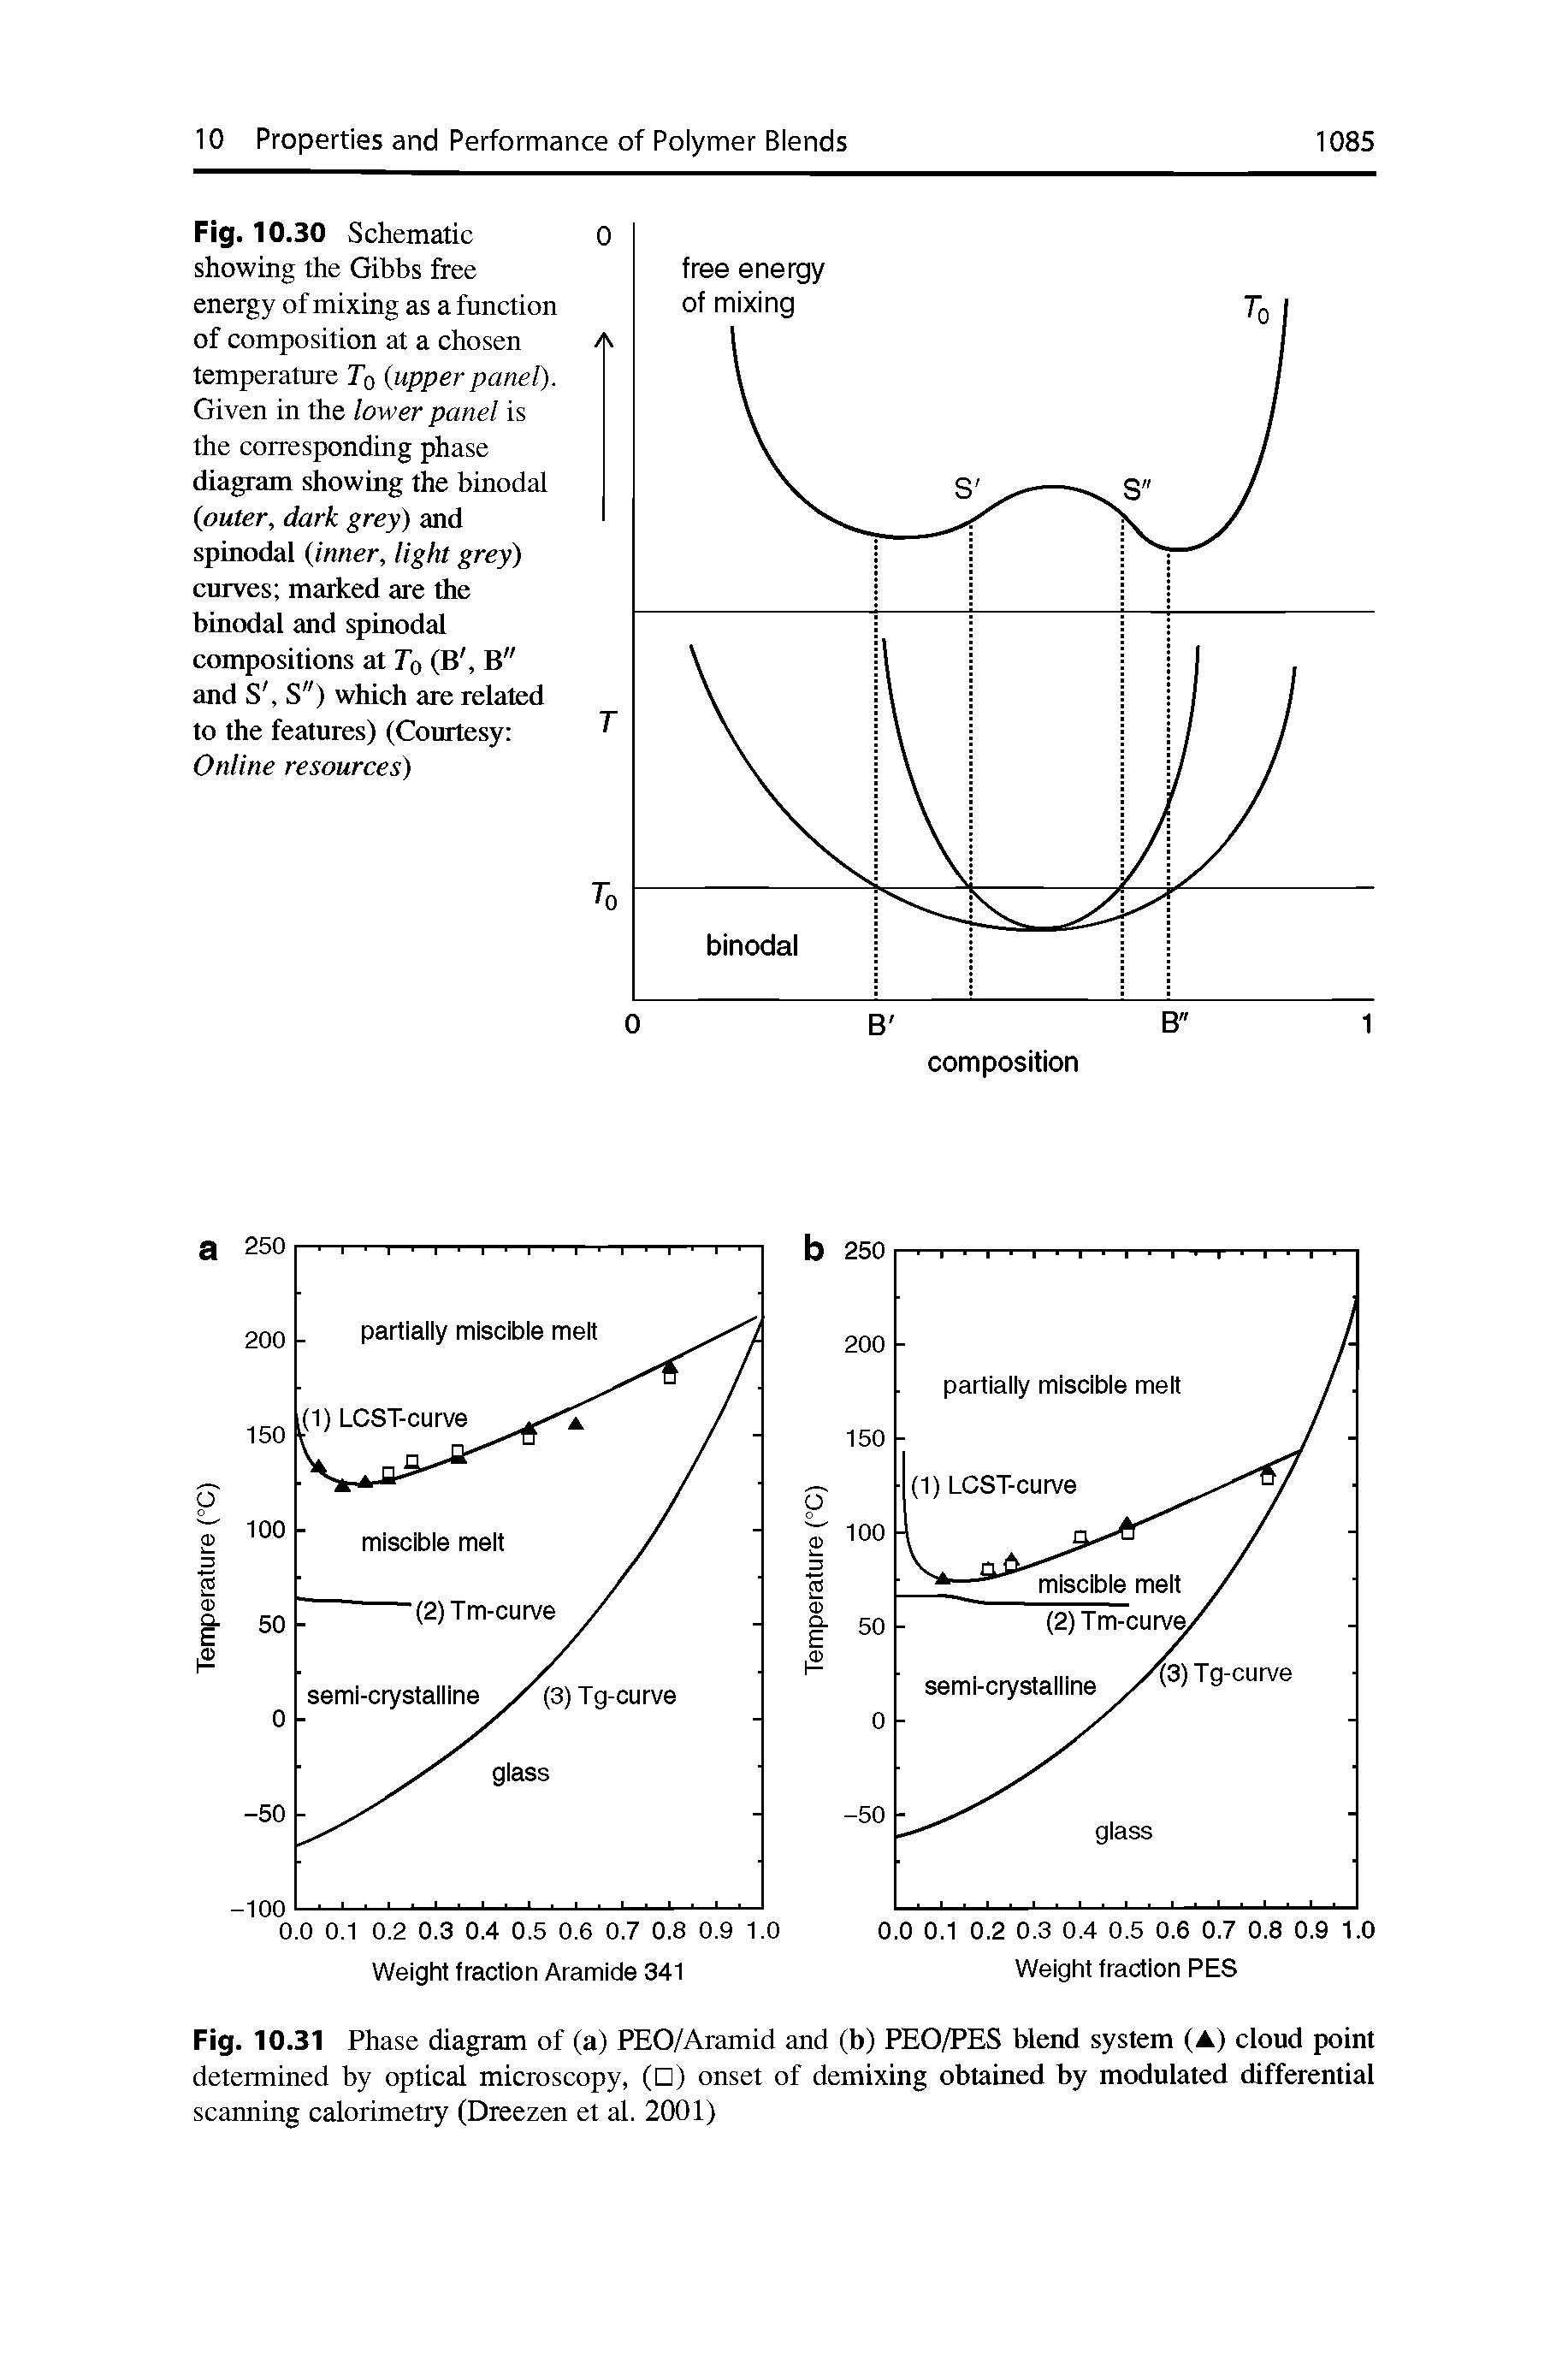 Fig. 10. 30 Schematic showing the Gibbs free energy of mixing as a function of composition at a chosen temperature Tq (upperpanel). Given in the lower panel is the corresponding phase diagram showing the binodal (outer, dark grey) and spinodal (inner, light grey) curves marked are the binodal and spinodal compositions at To (B, B" and S, S") which ate related to the features) (Courtesy Online resources)...